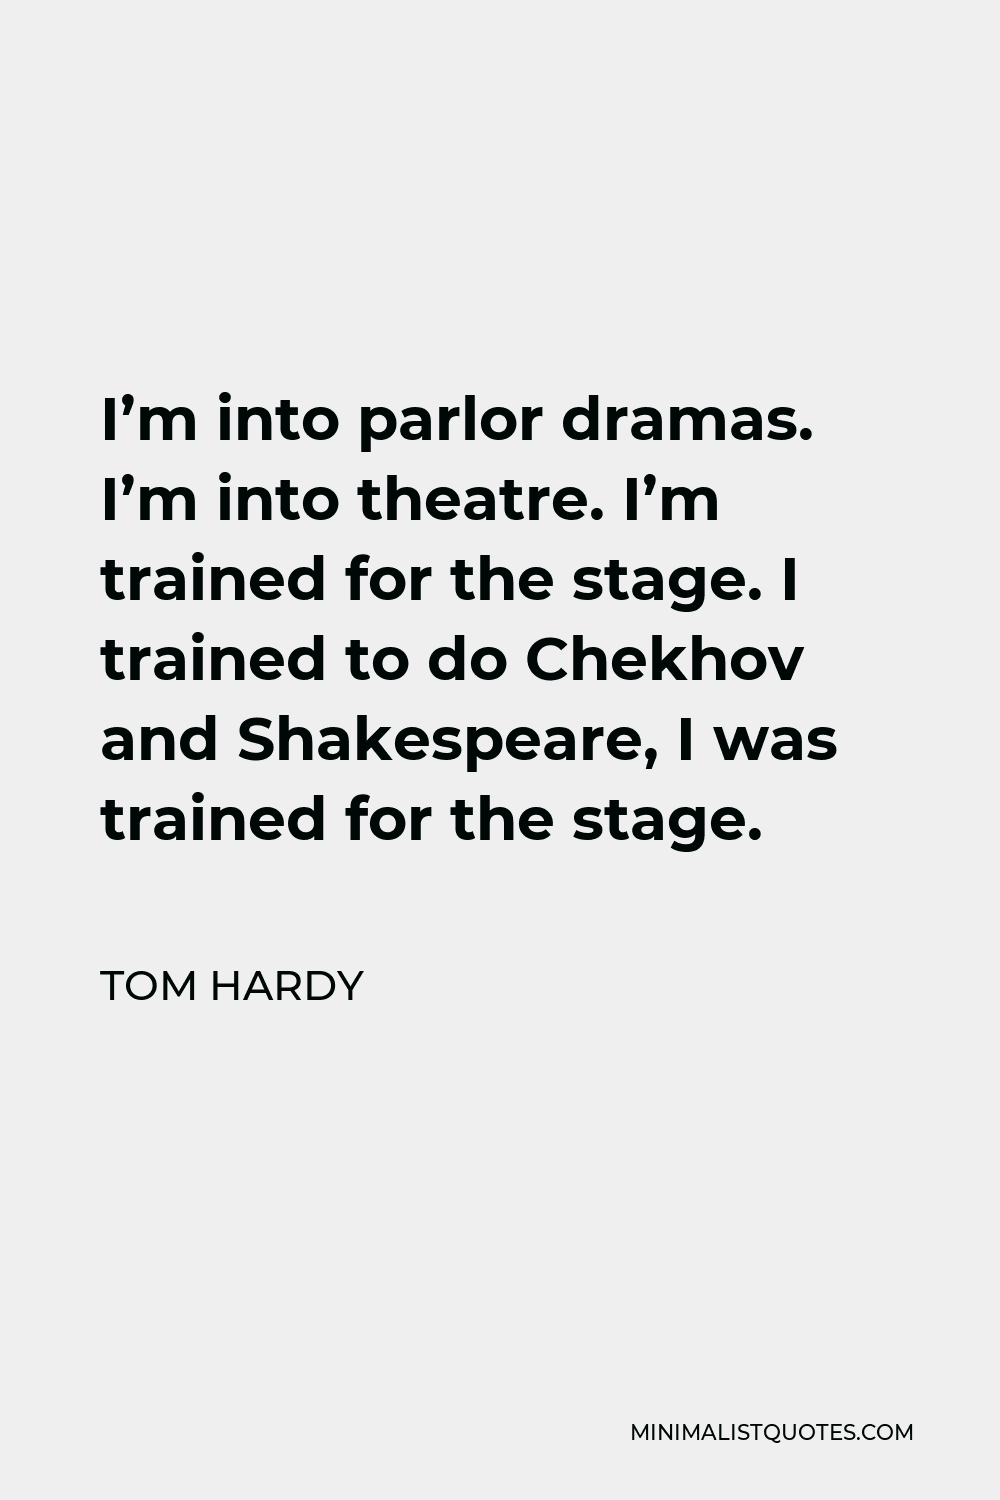 Tom Hardy Quote - I’m into parlor dramas. I’m into theatre. I’m trained for the stage. I trained to do Chekhov and Shakespeare, I was trained for the stage.